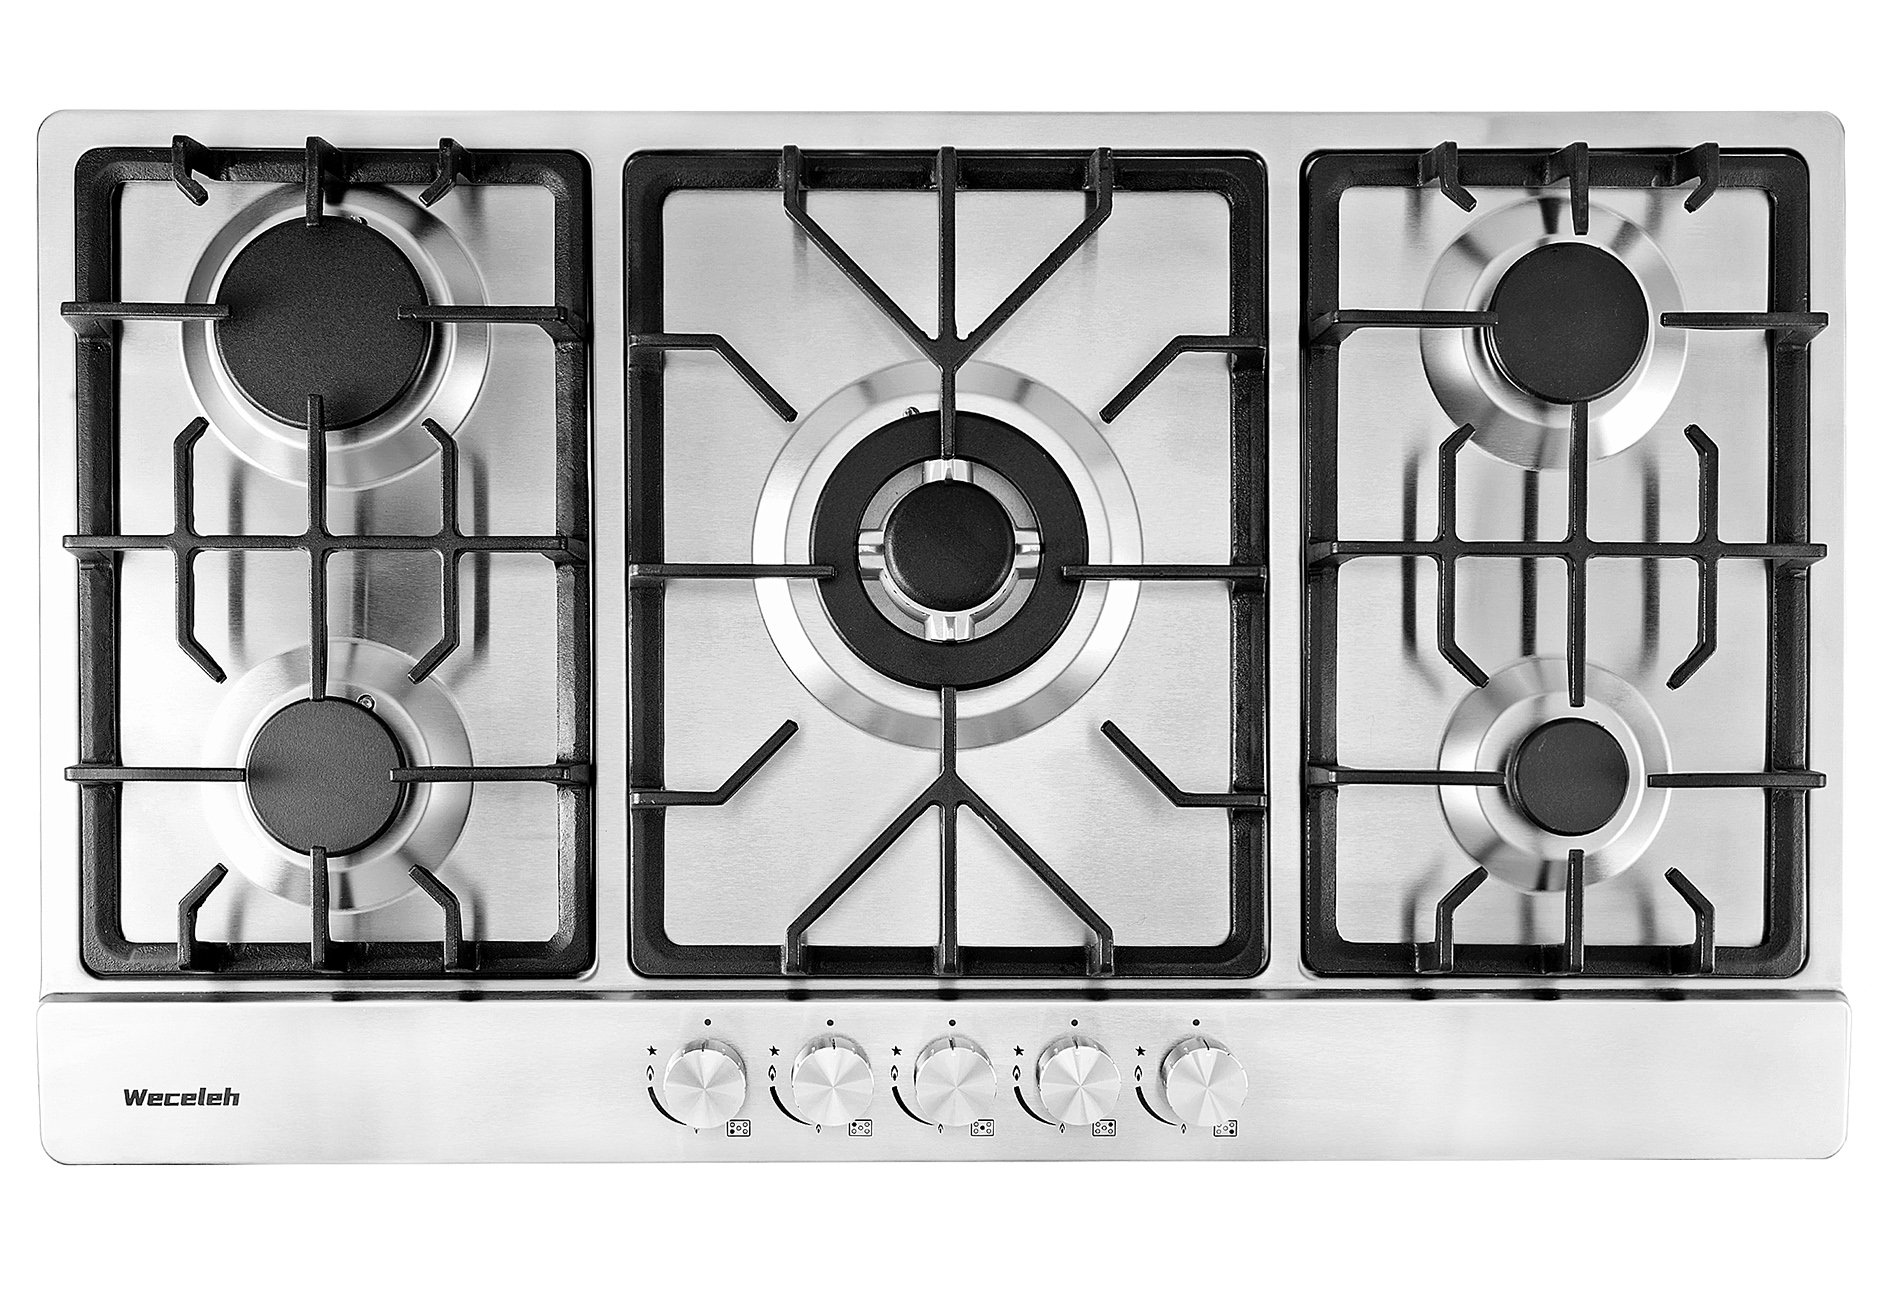 3 Burners Gas Stove Gas Cooktop, Stainless Steel Built-In Gas Hob Cooktops,  Gas Countertop For Home Kitchen Apartments, Thermocouple Protection, Easy